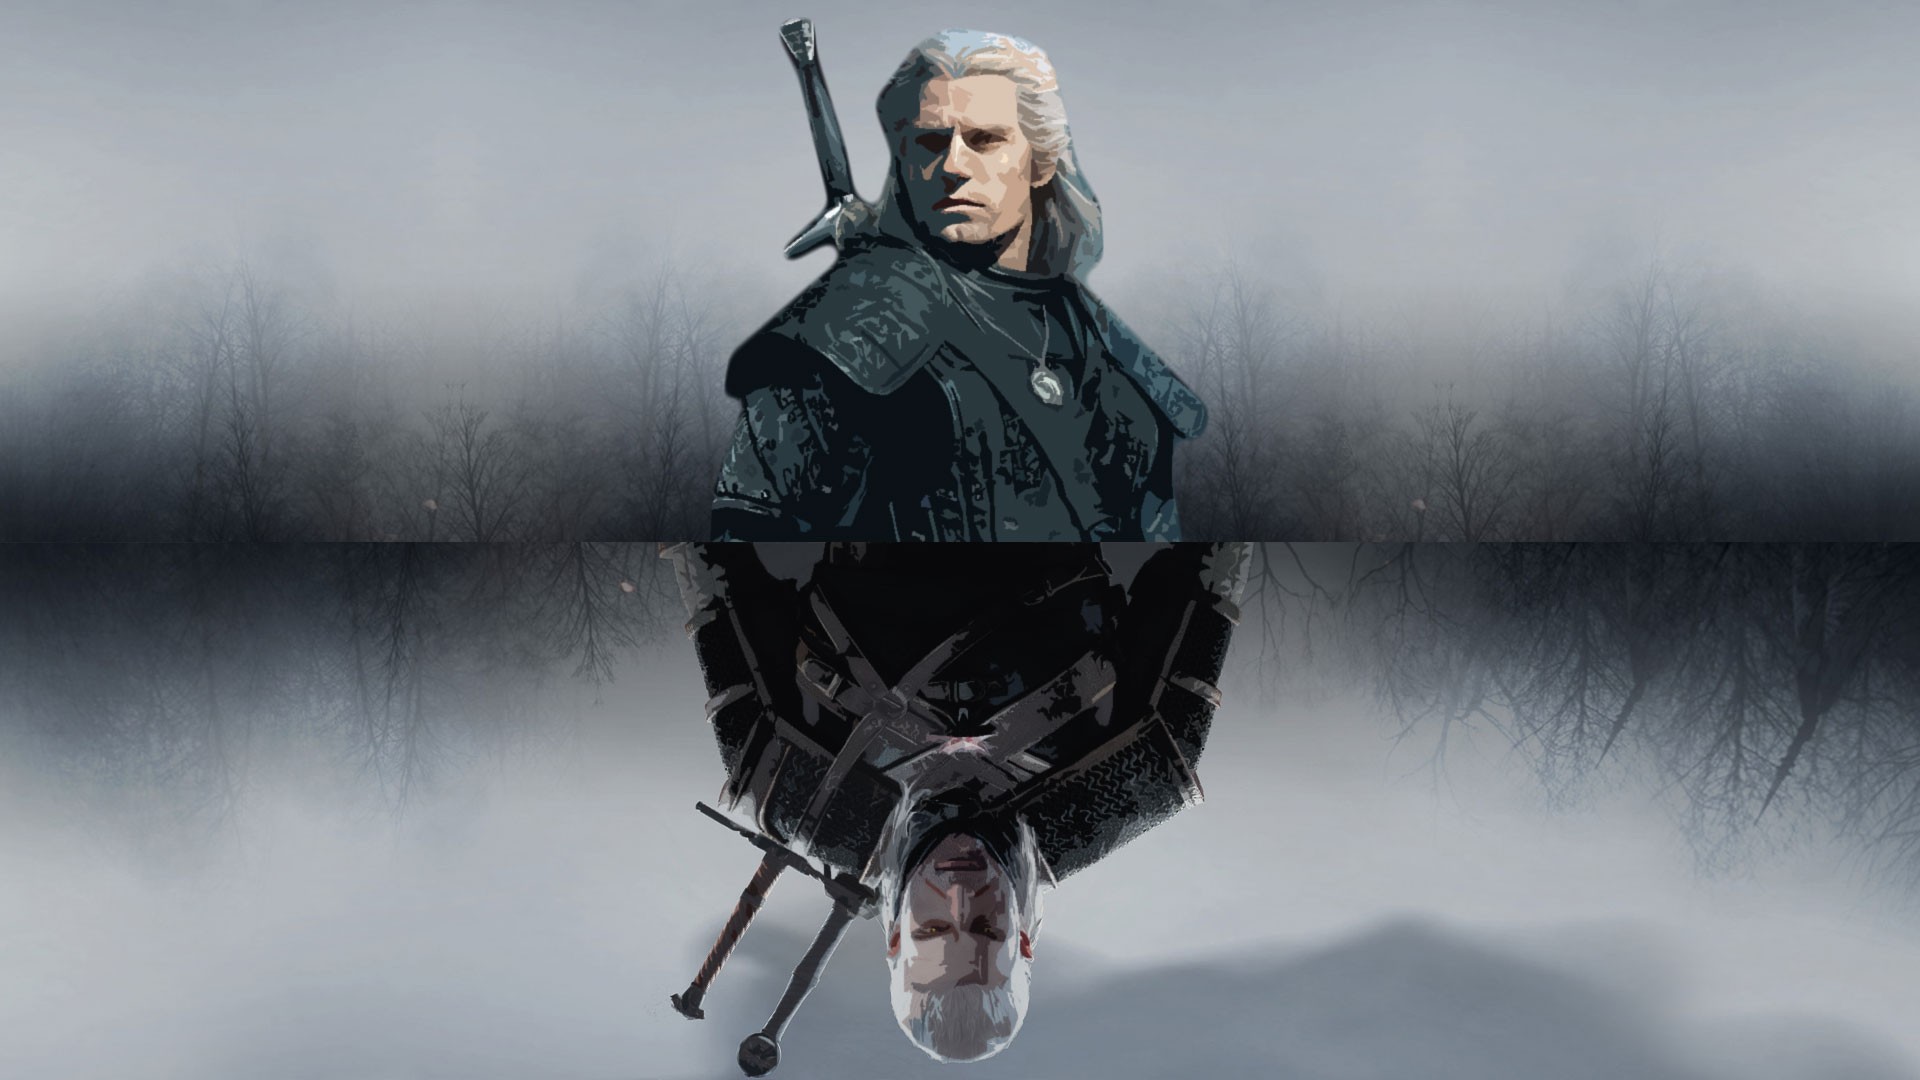 Wallpaper The Witcher HD with high-resolution 1920x1080 pixel. You can use this wallpaper for your Desktop Computer Backgrounds, Mac Wallpapers, Android Lock screen or iPhone Screensavers and another smartphone device